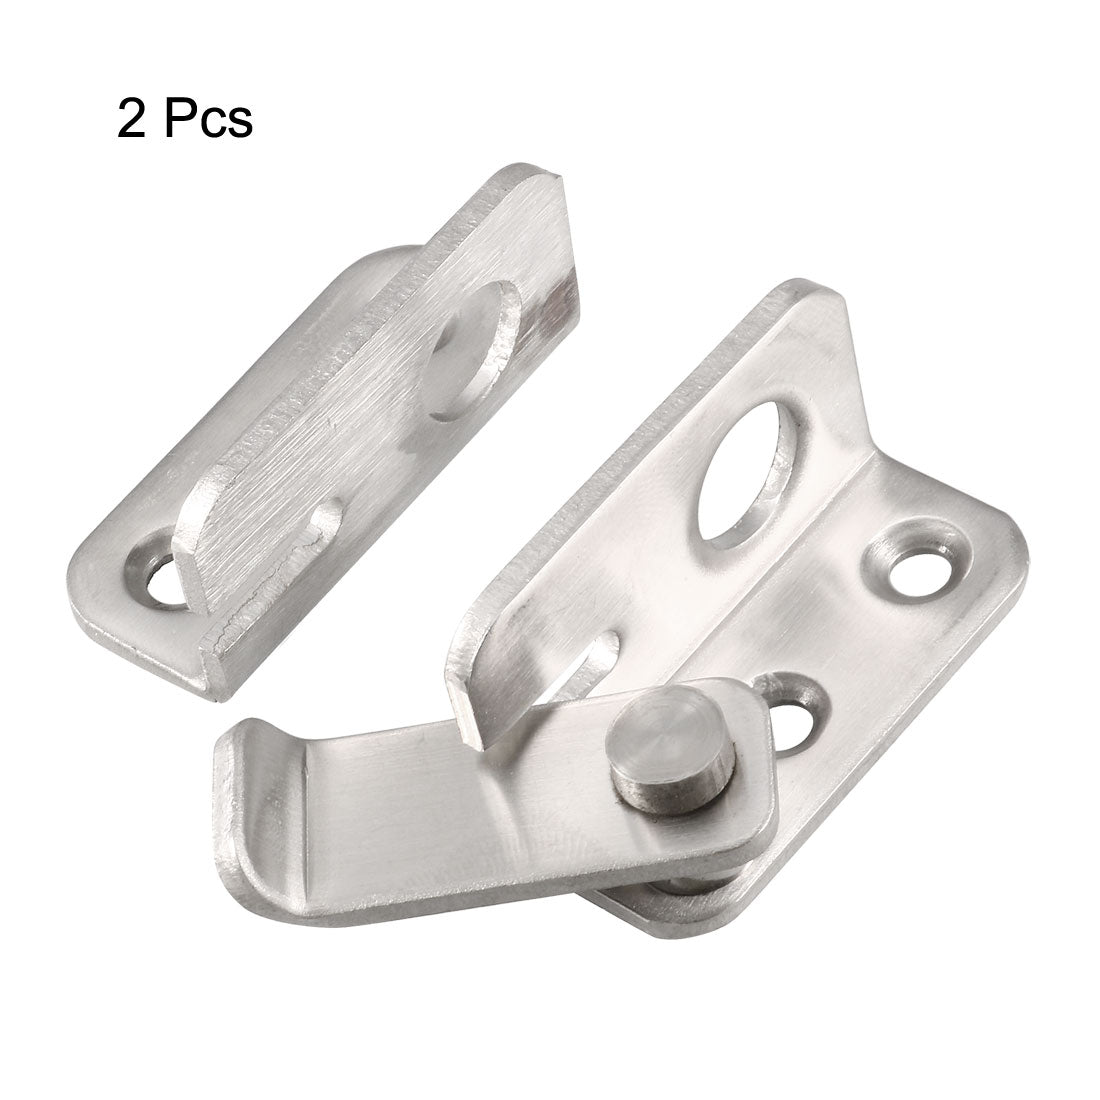 uxcell Uxcell Flip Door Latch 201 Stainless Steel 45x40mm Gate Latch Left Open Hasp Slide Lock with Padlock Hole 2 Pcs